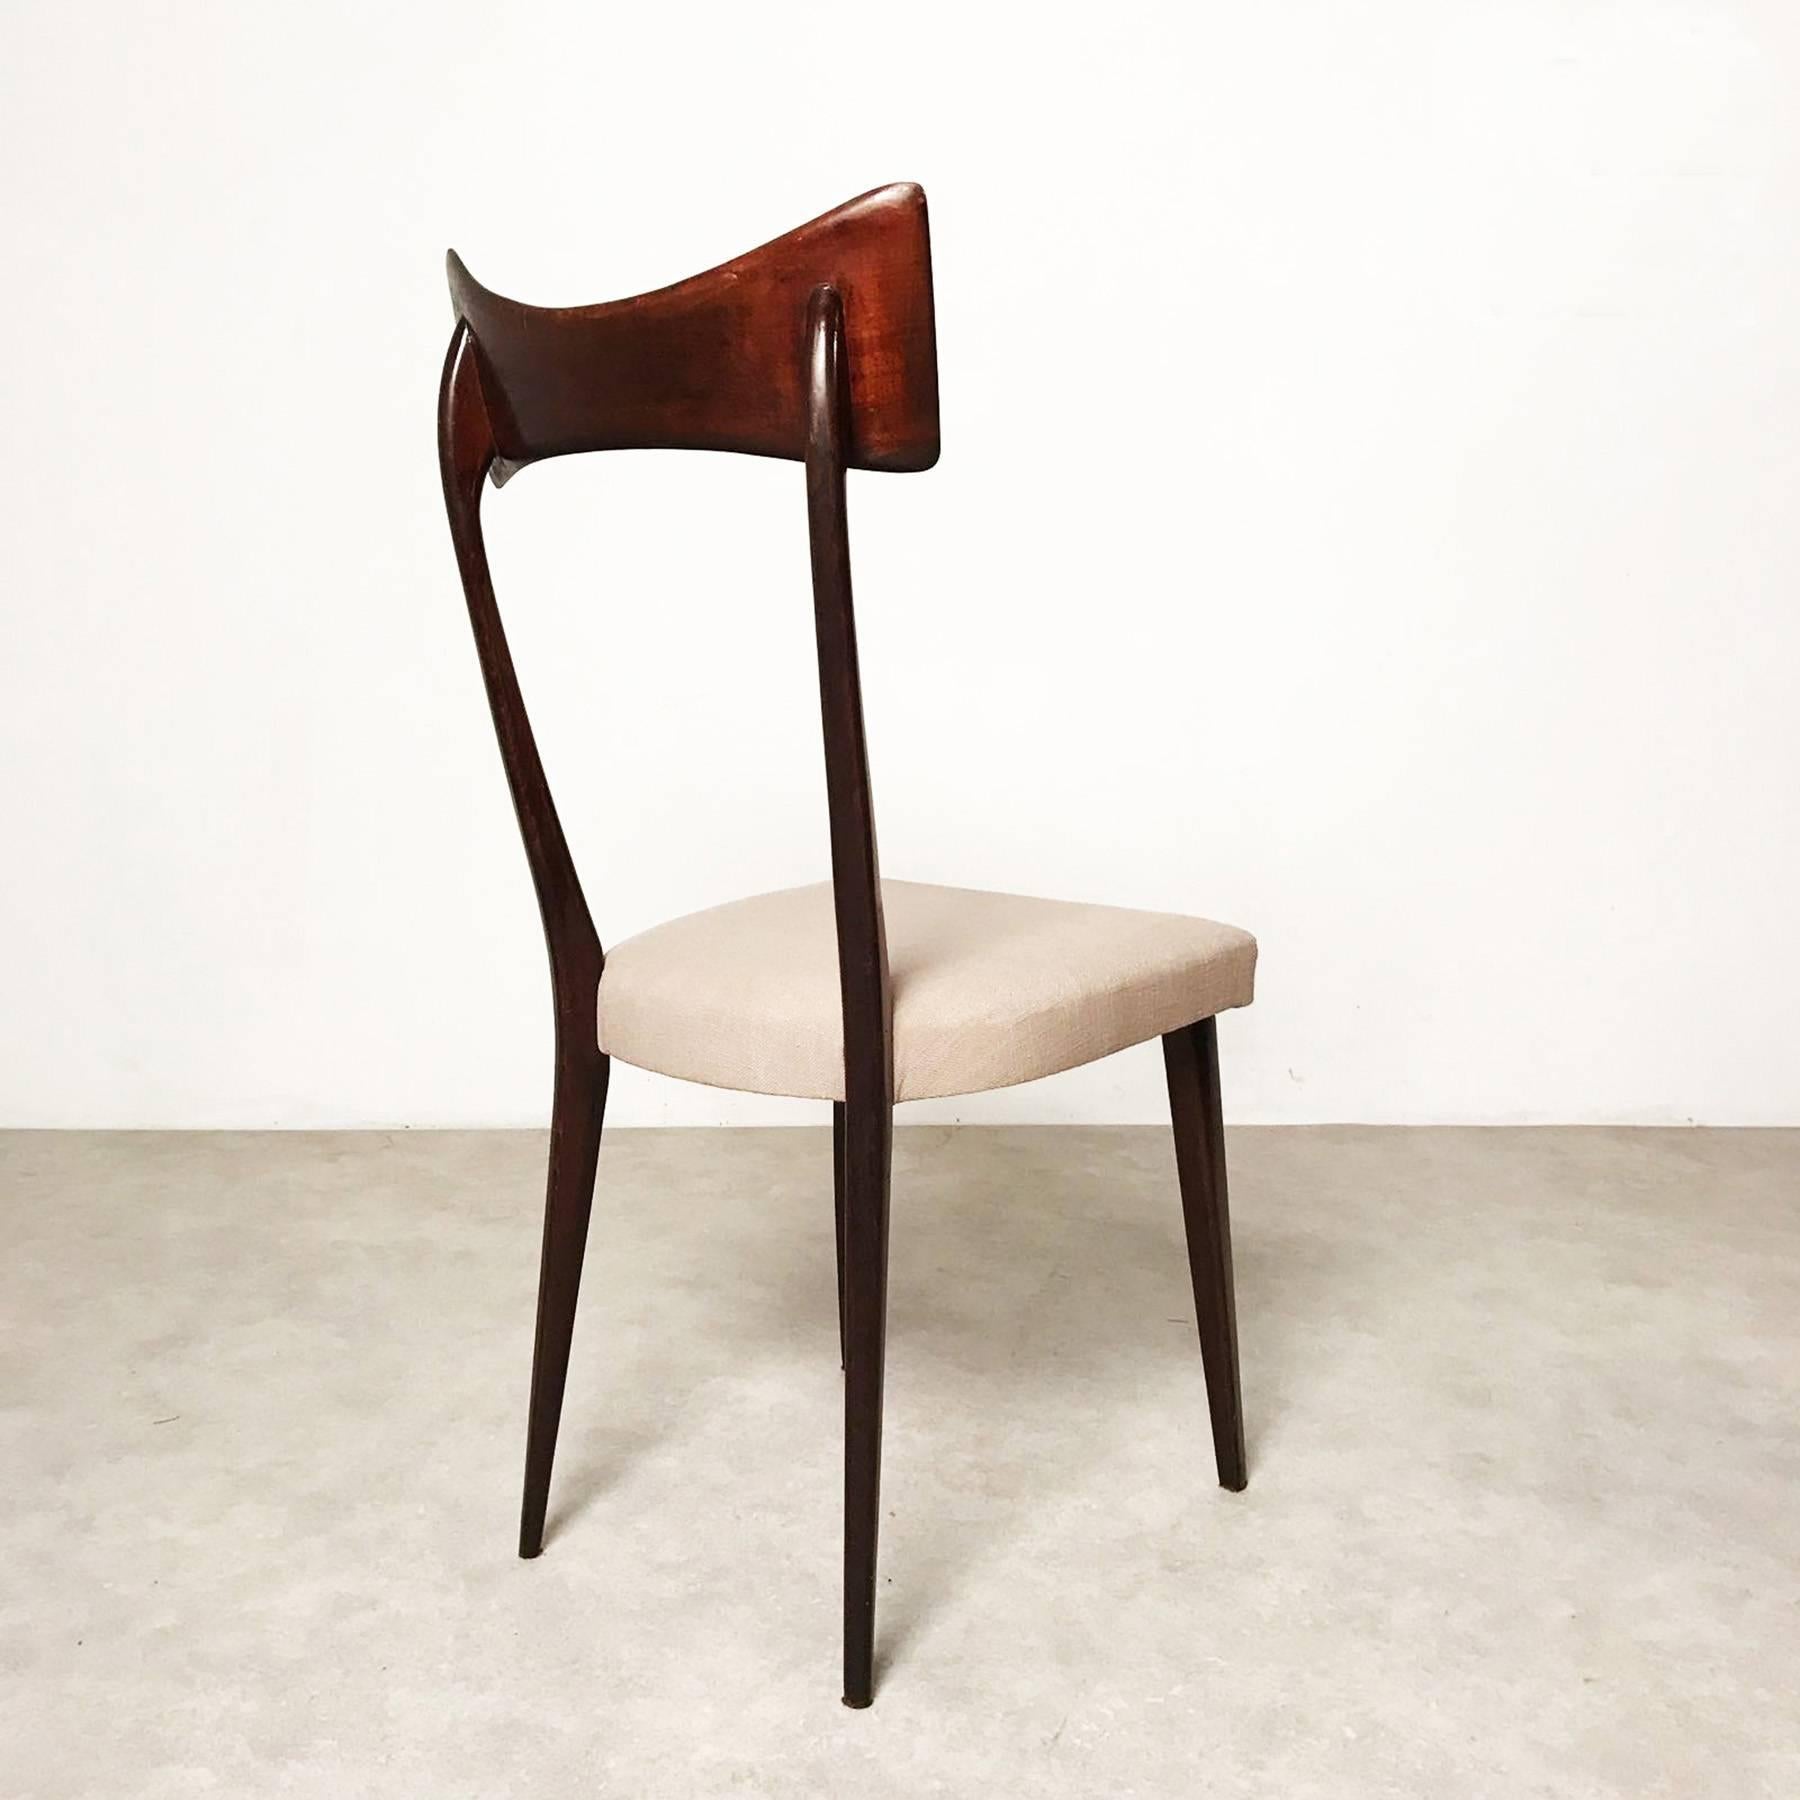 A set of six stunning dining chairs, designed and manufactured in the 1940s or 1950s in Italy. The chairs stand out for their beautiful organic design, which clearly reminds of works by Ico Parisi. 

All chairs are in a good used condition with